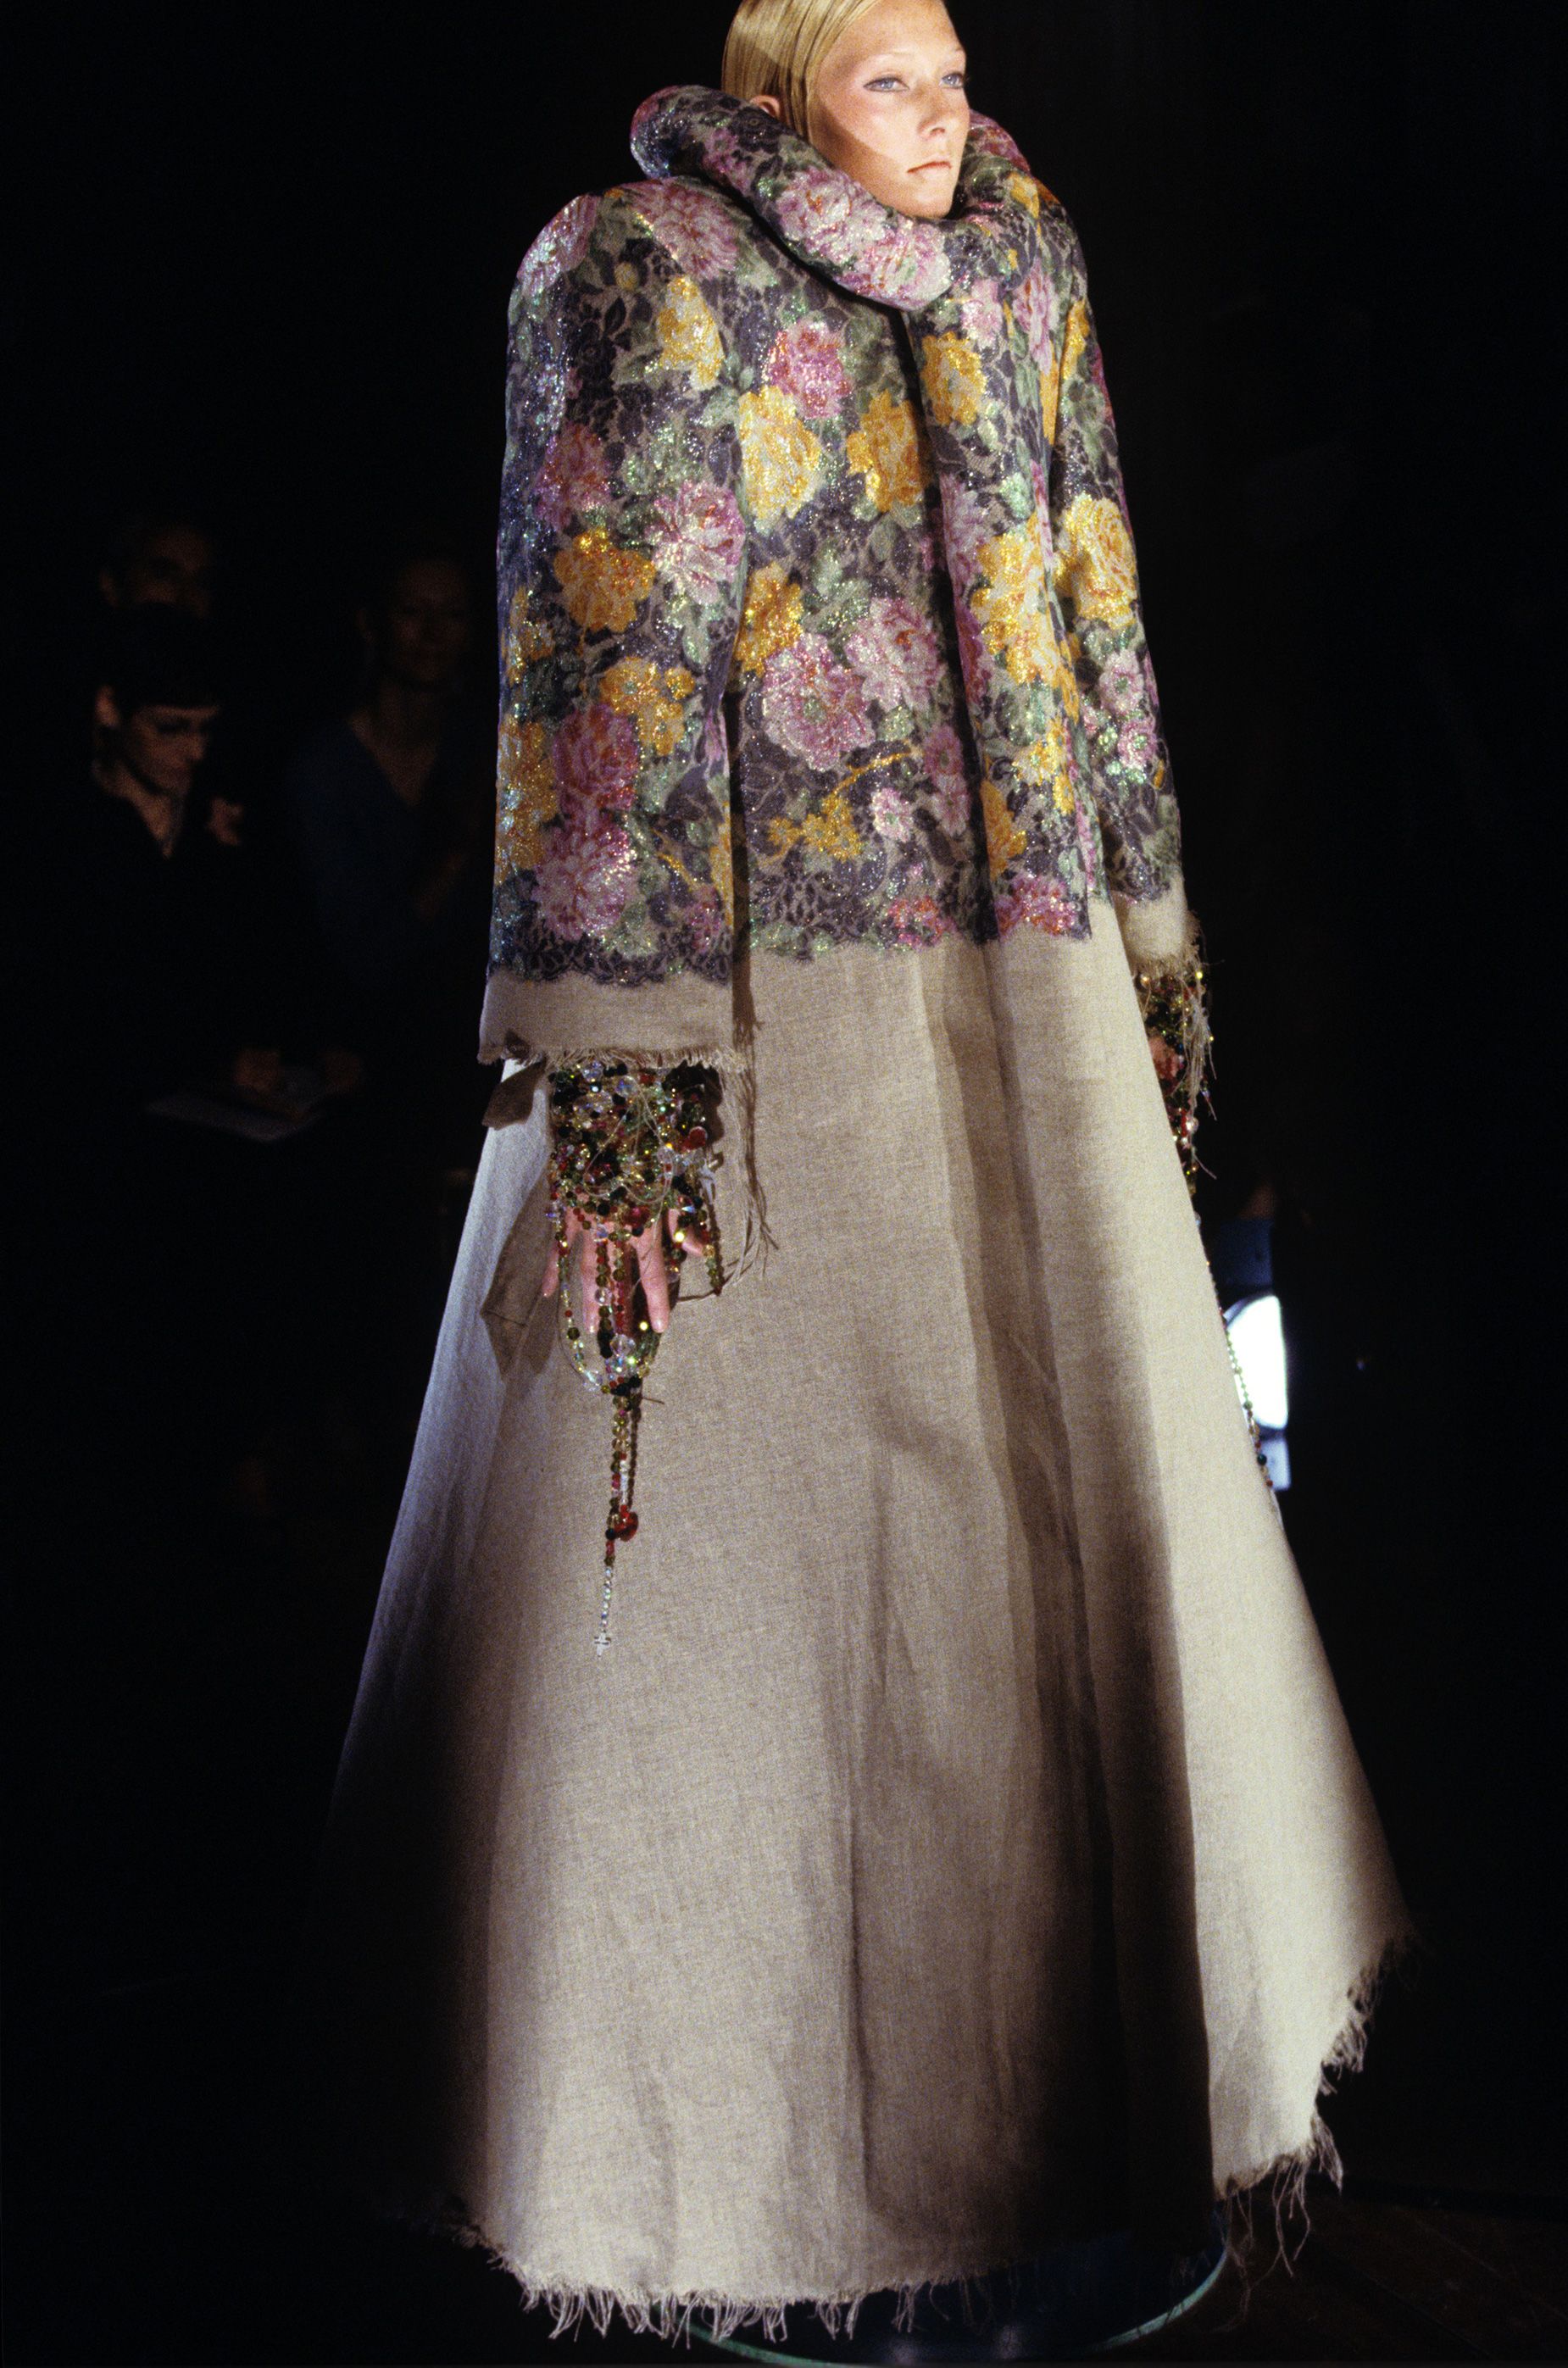 Viktor & Rolf's Fall-Winter 1999 collection featured Swarovski embroidered couture pieces.